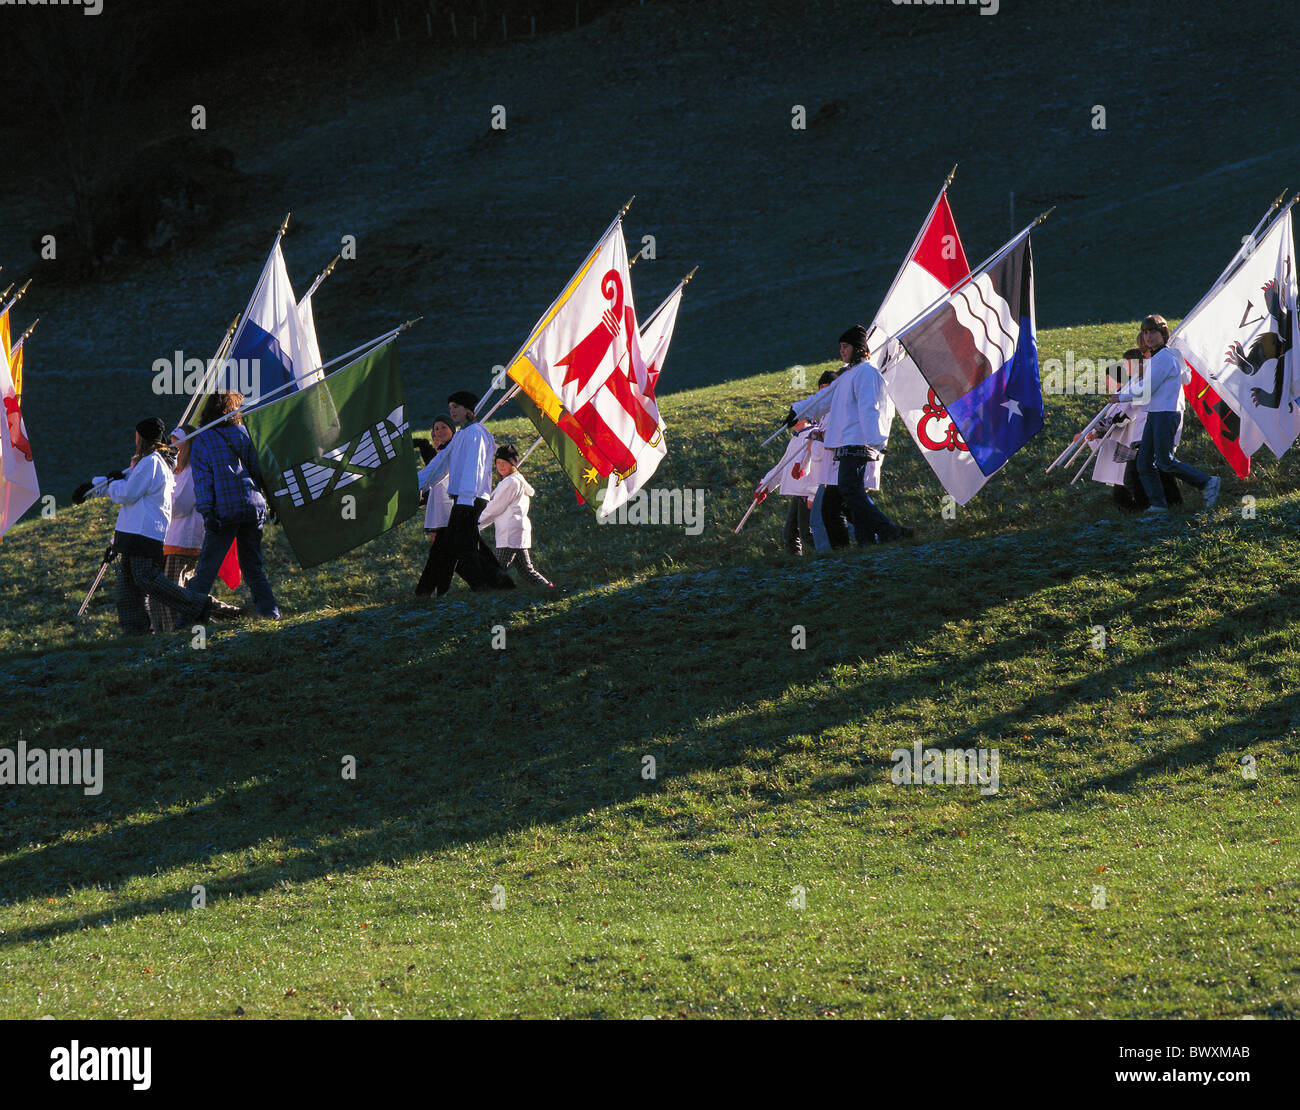 dusk twilight standard-bearer ensign commemorative celebration anniversary youngsters cantons battle fight Stock Photo